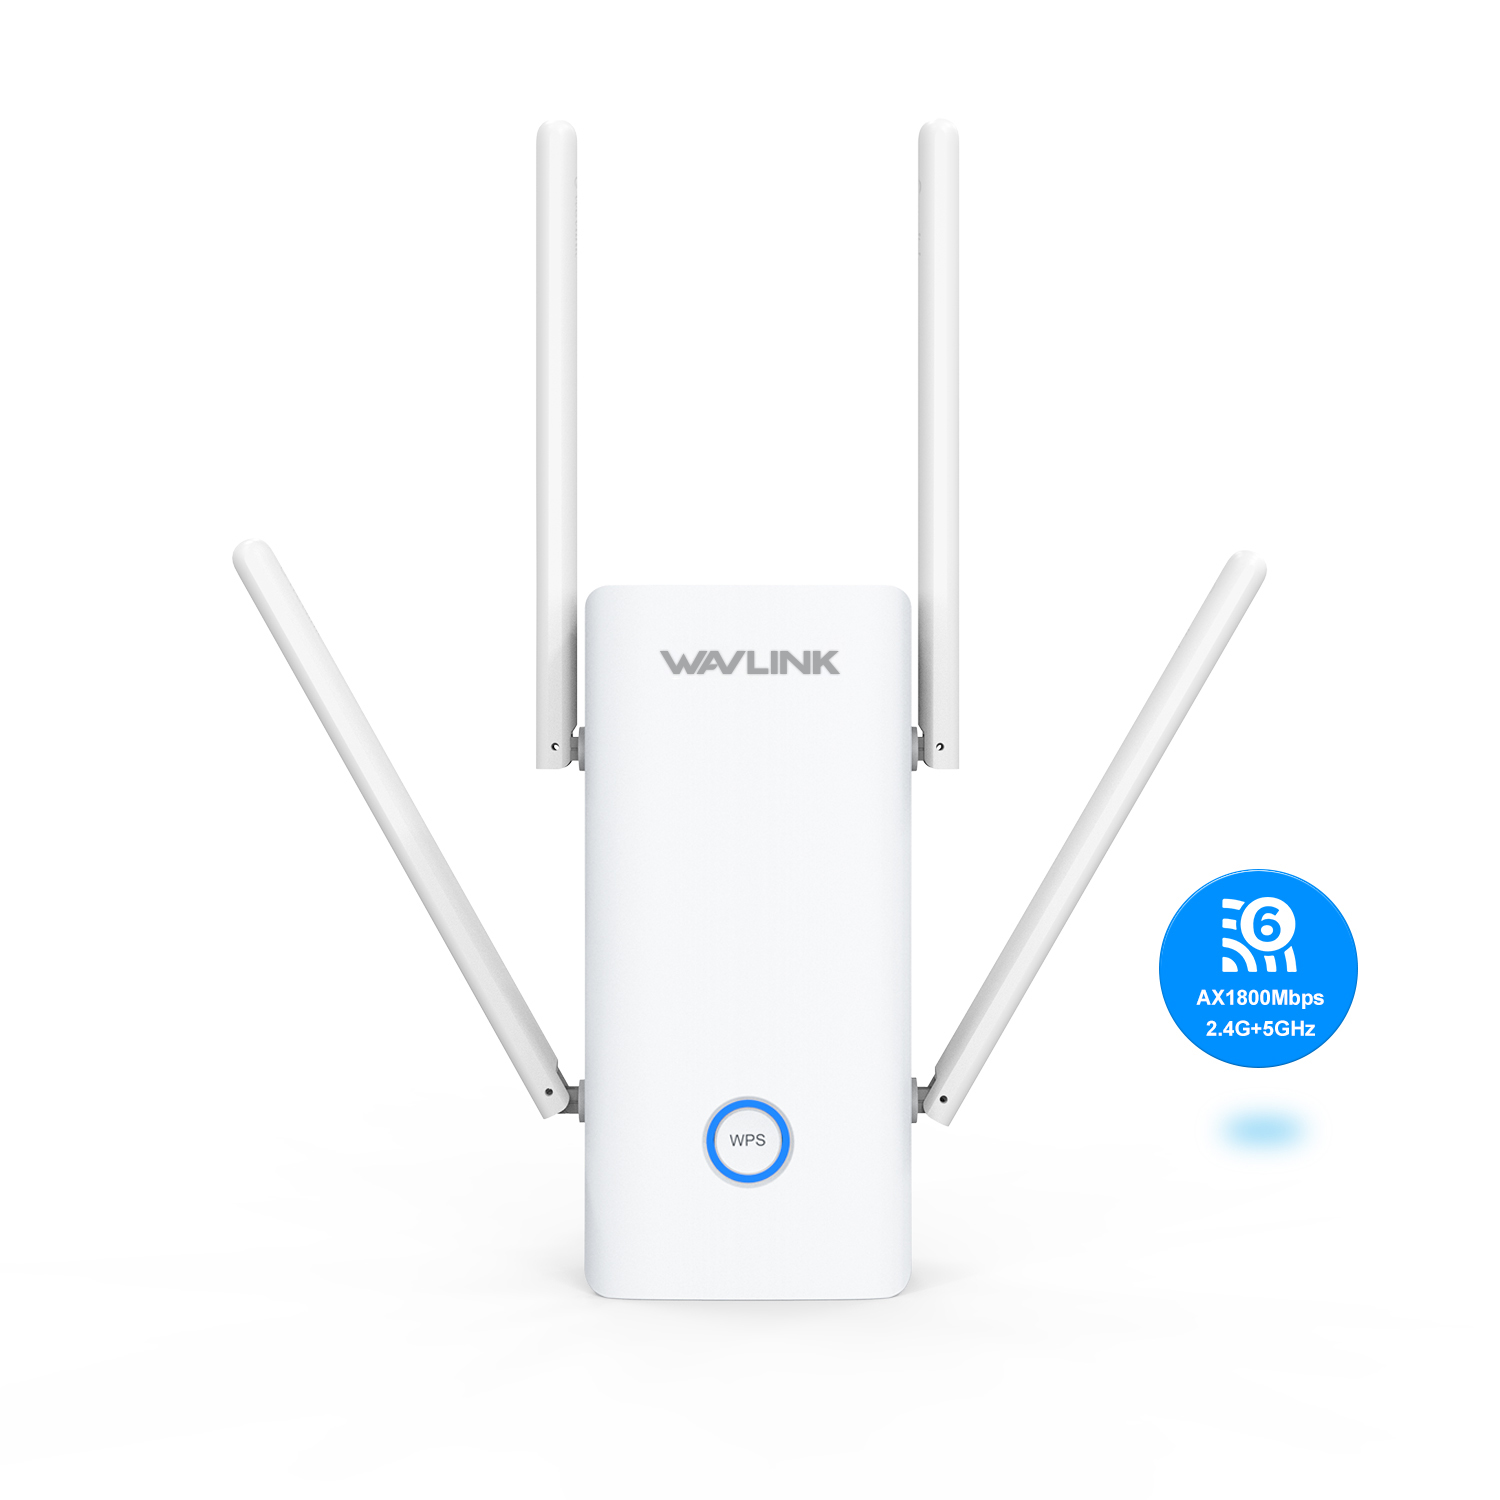 Wavlink AX1800 WiFi 6 Mesh Range Extender-Internet Booster, Dual Band  Wireless Signal Booster & Repeater up to 1.8Gbps Speed, AP Mode, Mesh Node  with Ethernet Port Extend Internet WiFi to Home Device